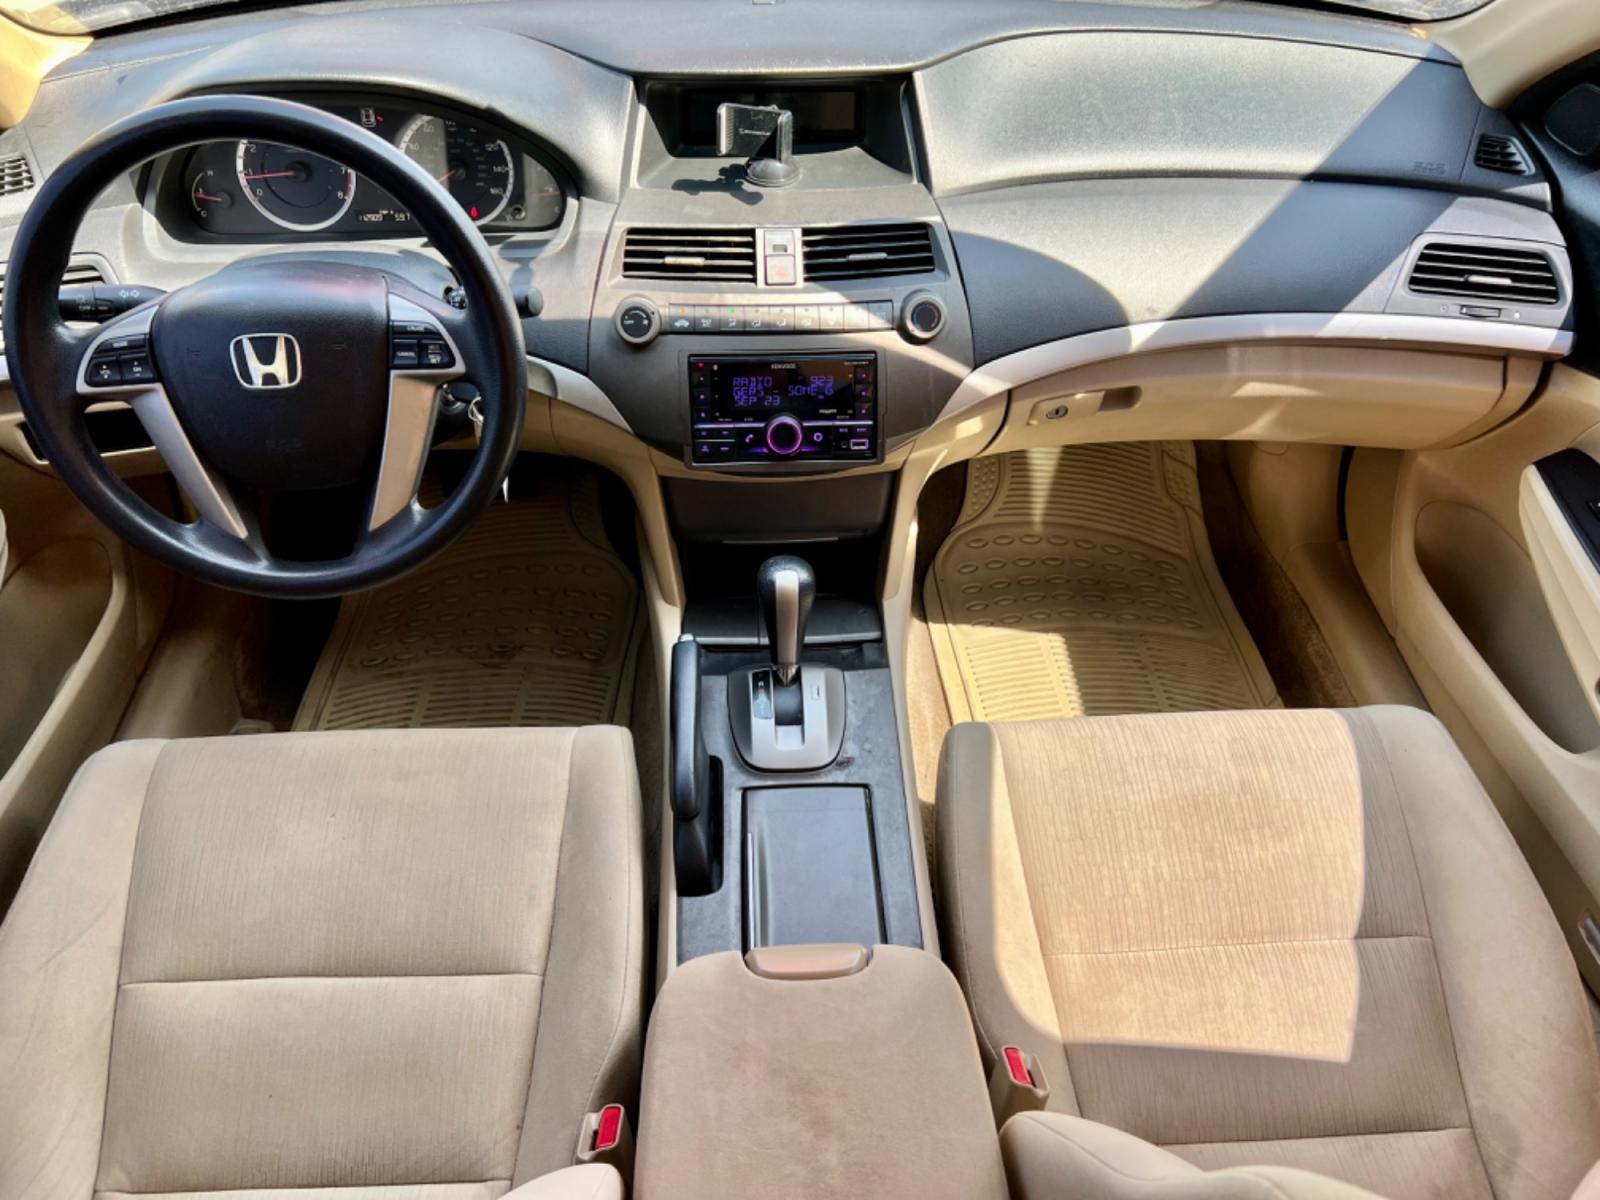 2011 GRAY HONDA ACCORD LX (1HGCP2F38BA) , located at 5900 E. Lancaster Ave., Fort Worth, TX, 76112, (817) 457-5456, 0.000000, 0.000000 - This is a 2011 HONDA ACCORD LX 4 DOOR SEDAN that is in excellent condition. There are no dents or scratches. The interior is clean with no rips or tears or stains. All power windows, door locks and seats. Ice cold AC for those hot Texas summer days. It is equipped with a CD player, AM/FM radio, AUX - Photo #17